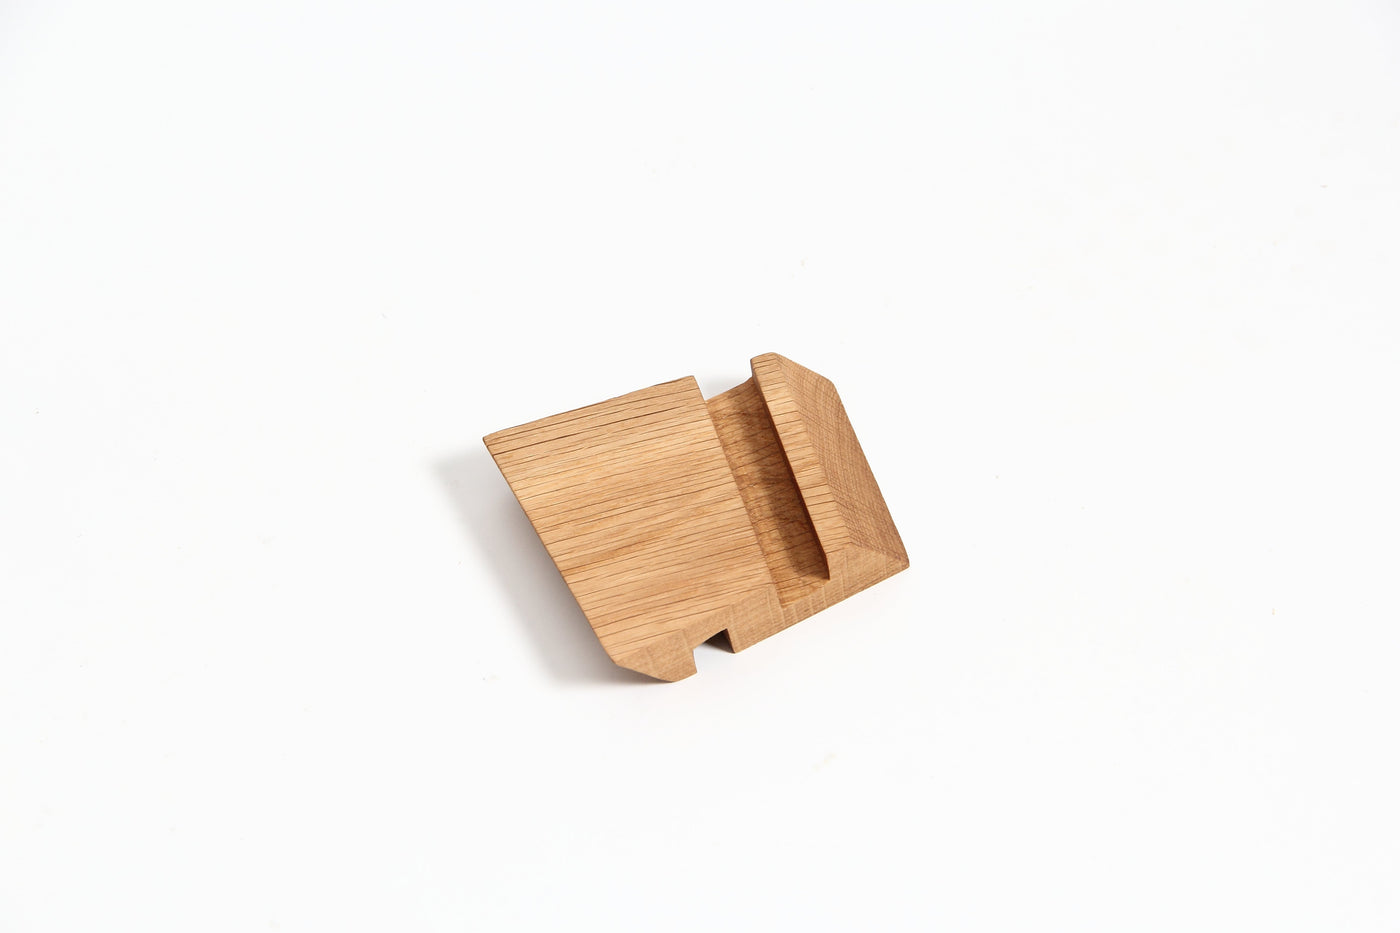 Stendas Oak Phone Stand-Home Goods-MAGNETS, SUSTAINABLE DECOR-Forest Homes-Nature inspired decor-Nature decor